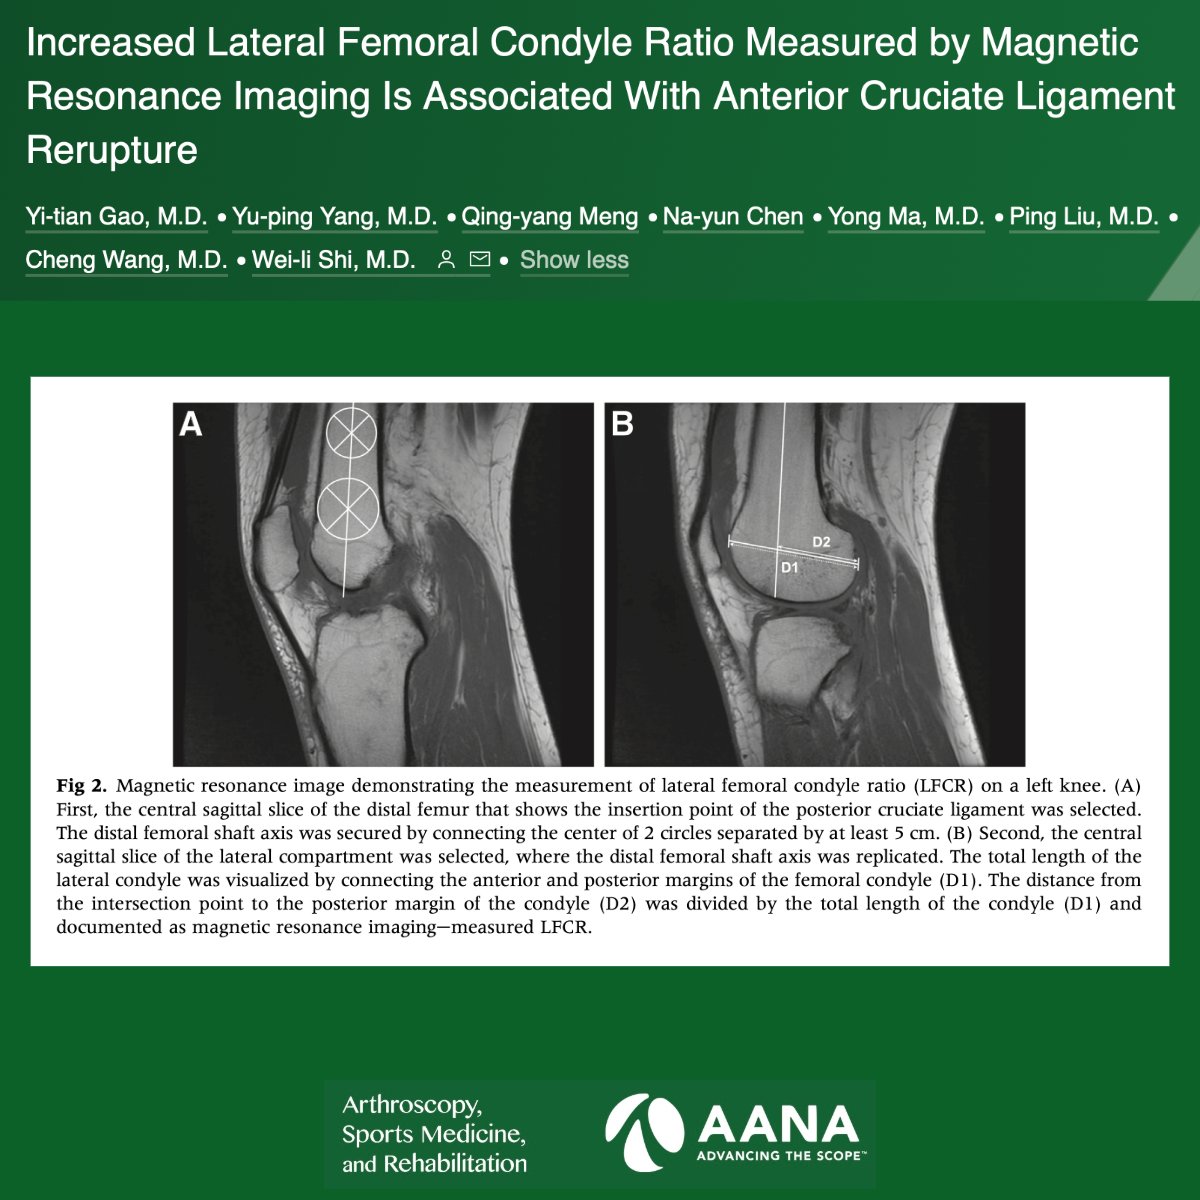 Gao et al reported that MRI-measured lateral femoral condyle ratio was associated with ACL rerupture after anatomic ACL reconstruction . #ACLInjury #MRI #ACLReconstruction